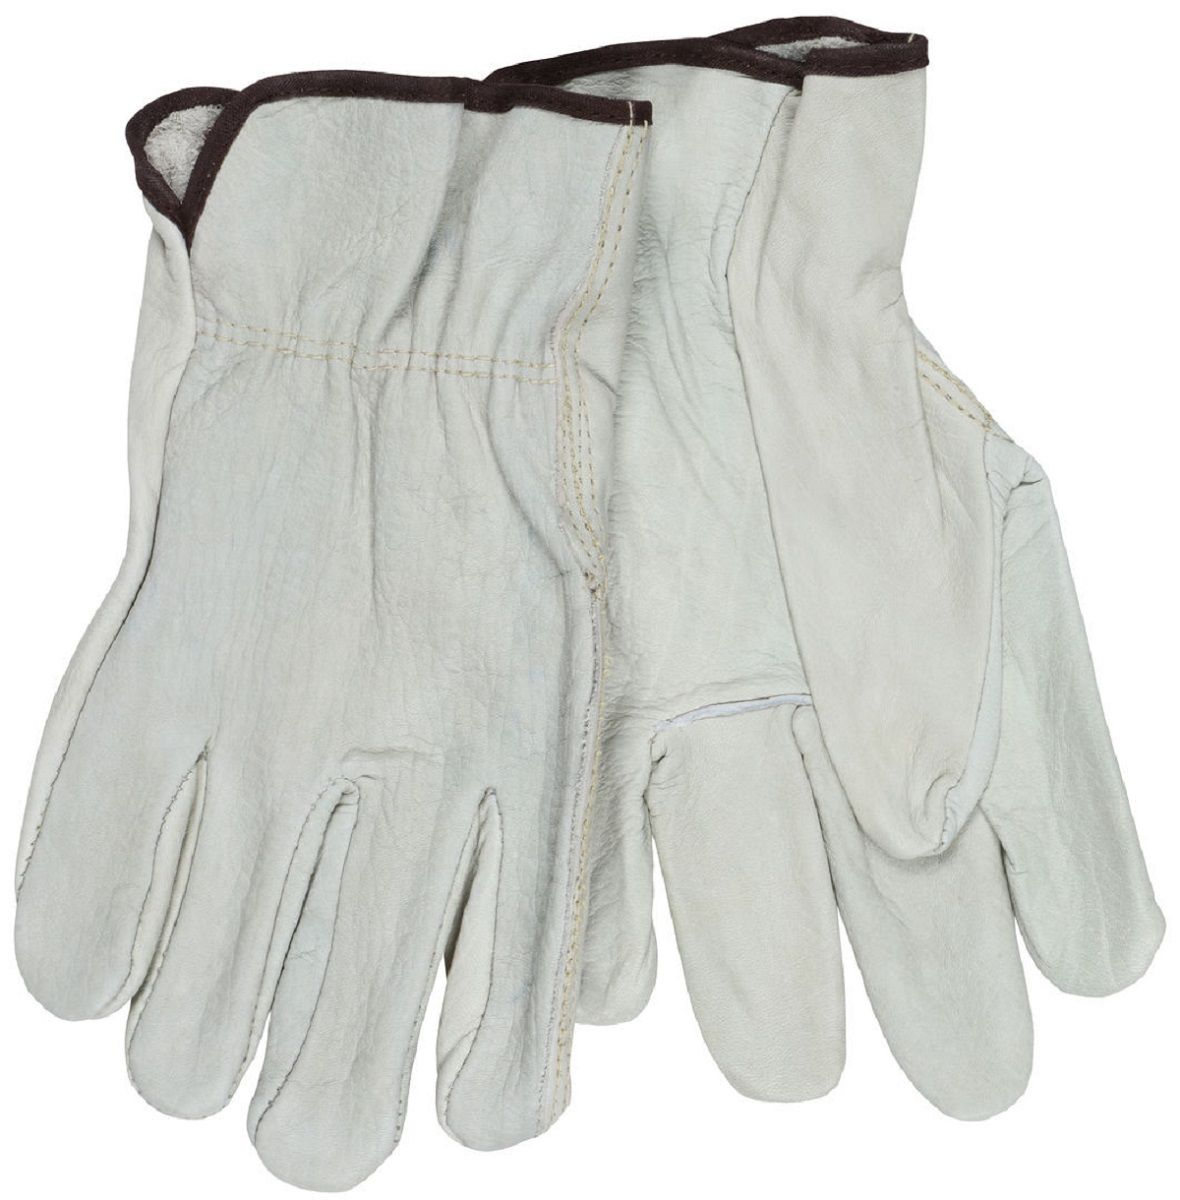 MCR Safety 3202 CV Grade Unlined Grain Cow Leather, Drivers Work Gloves, Beige, Box of 12 Pairs